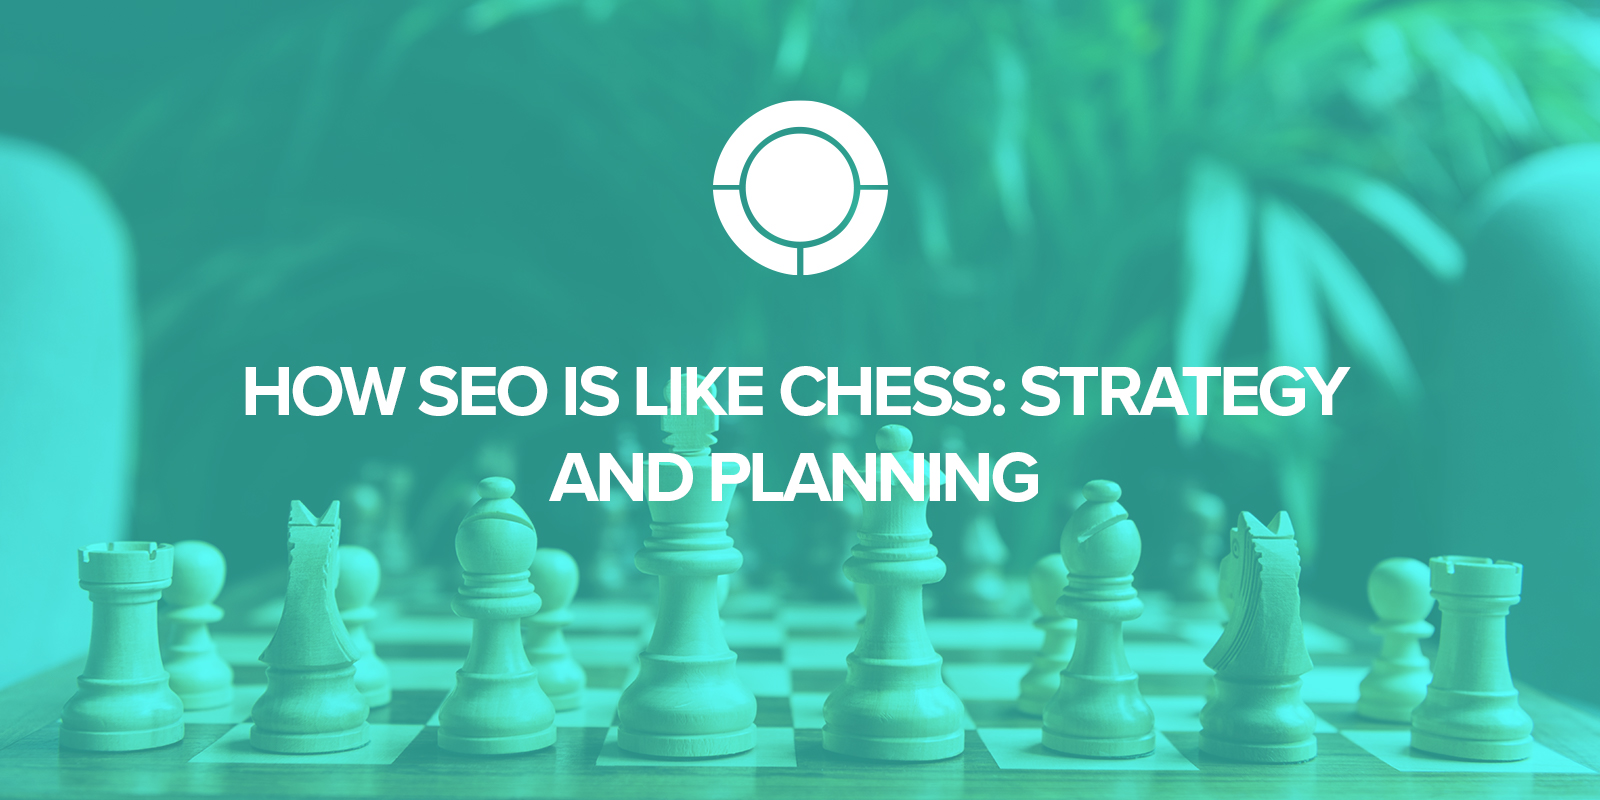 How SEO is Like Chess: Strategy and Planning